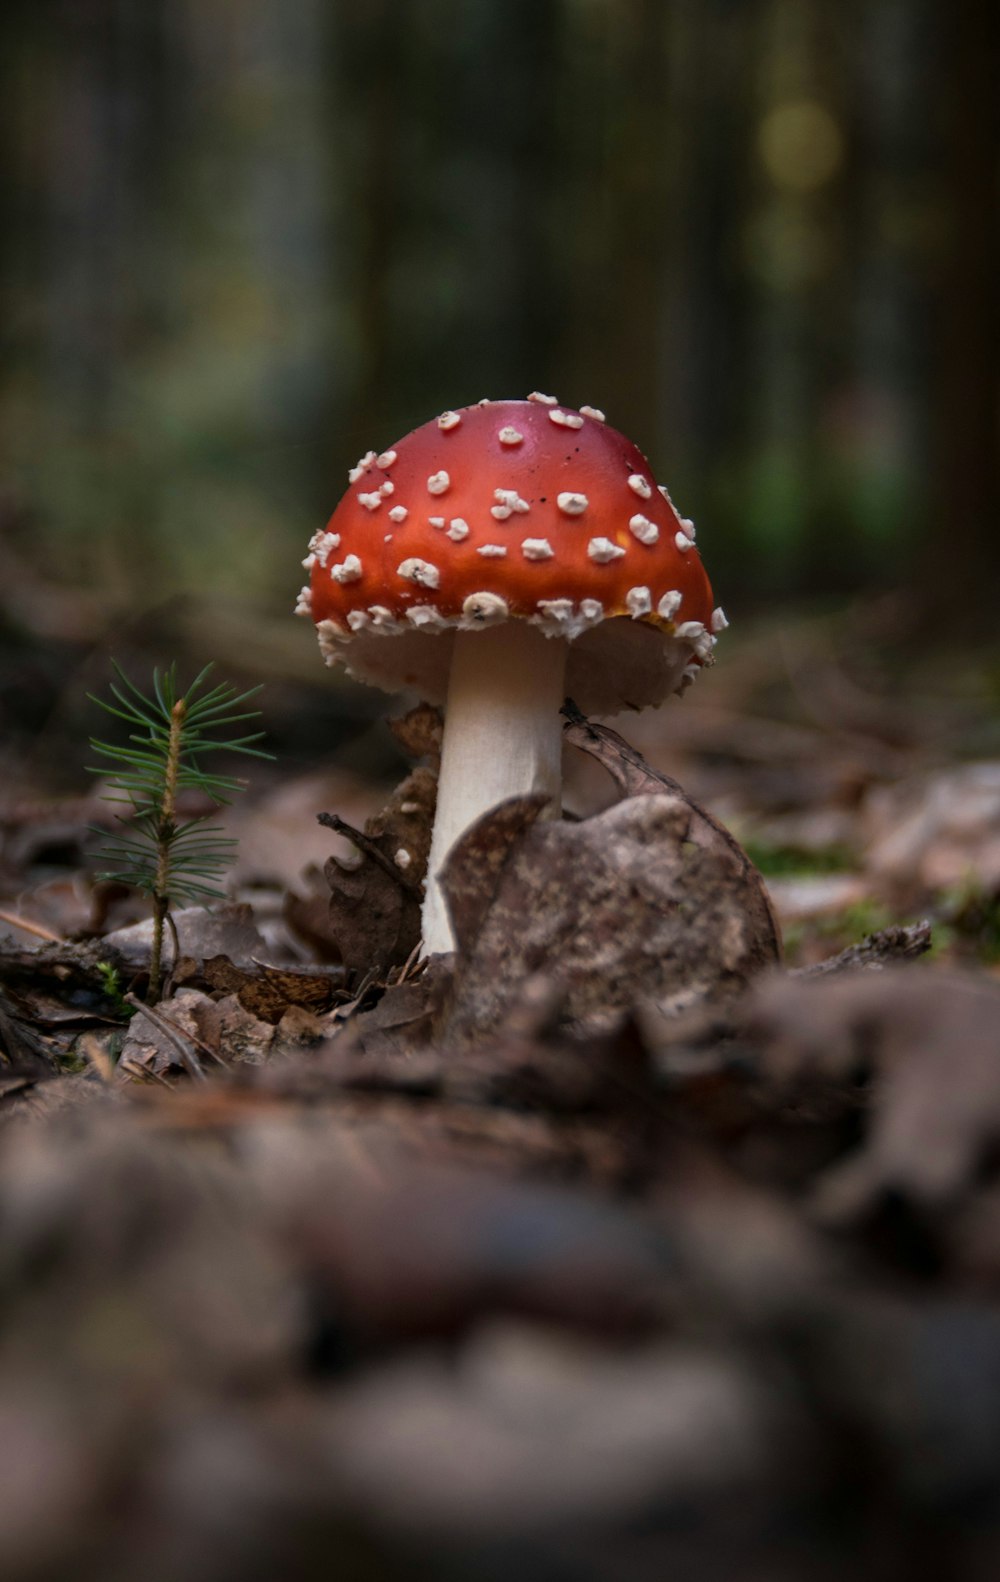 red and white mushroom in soil